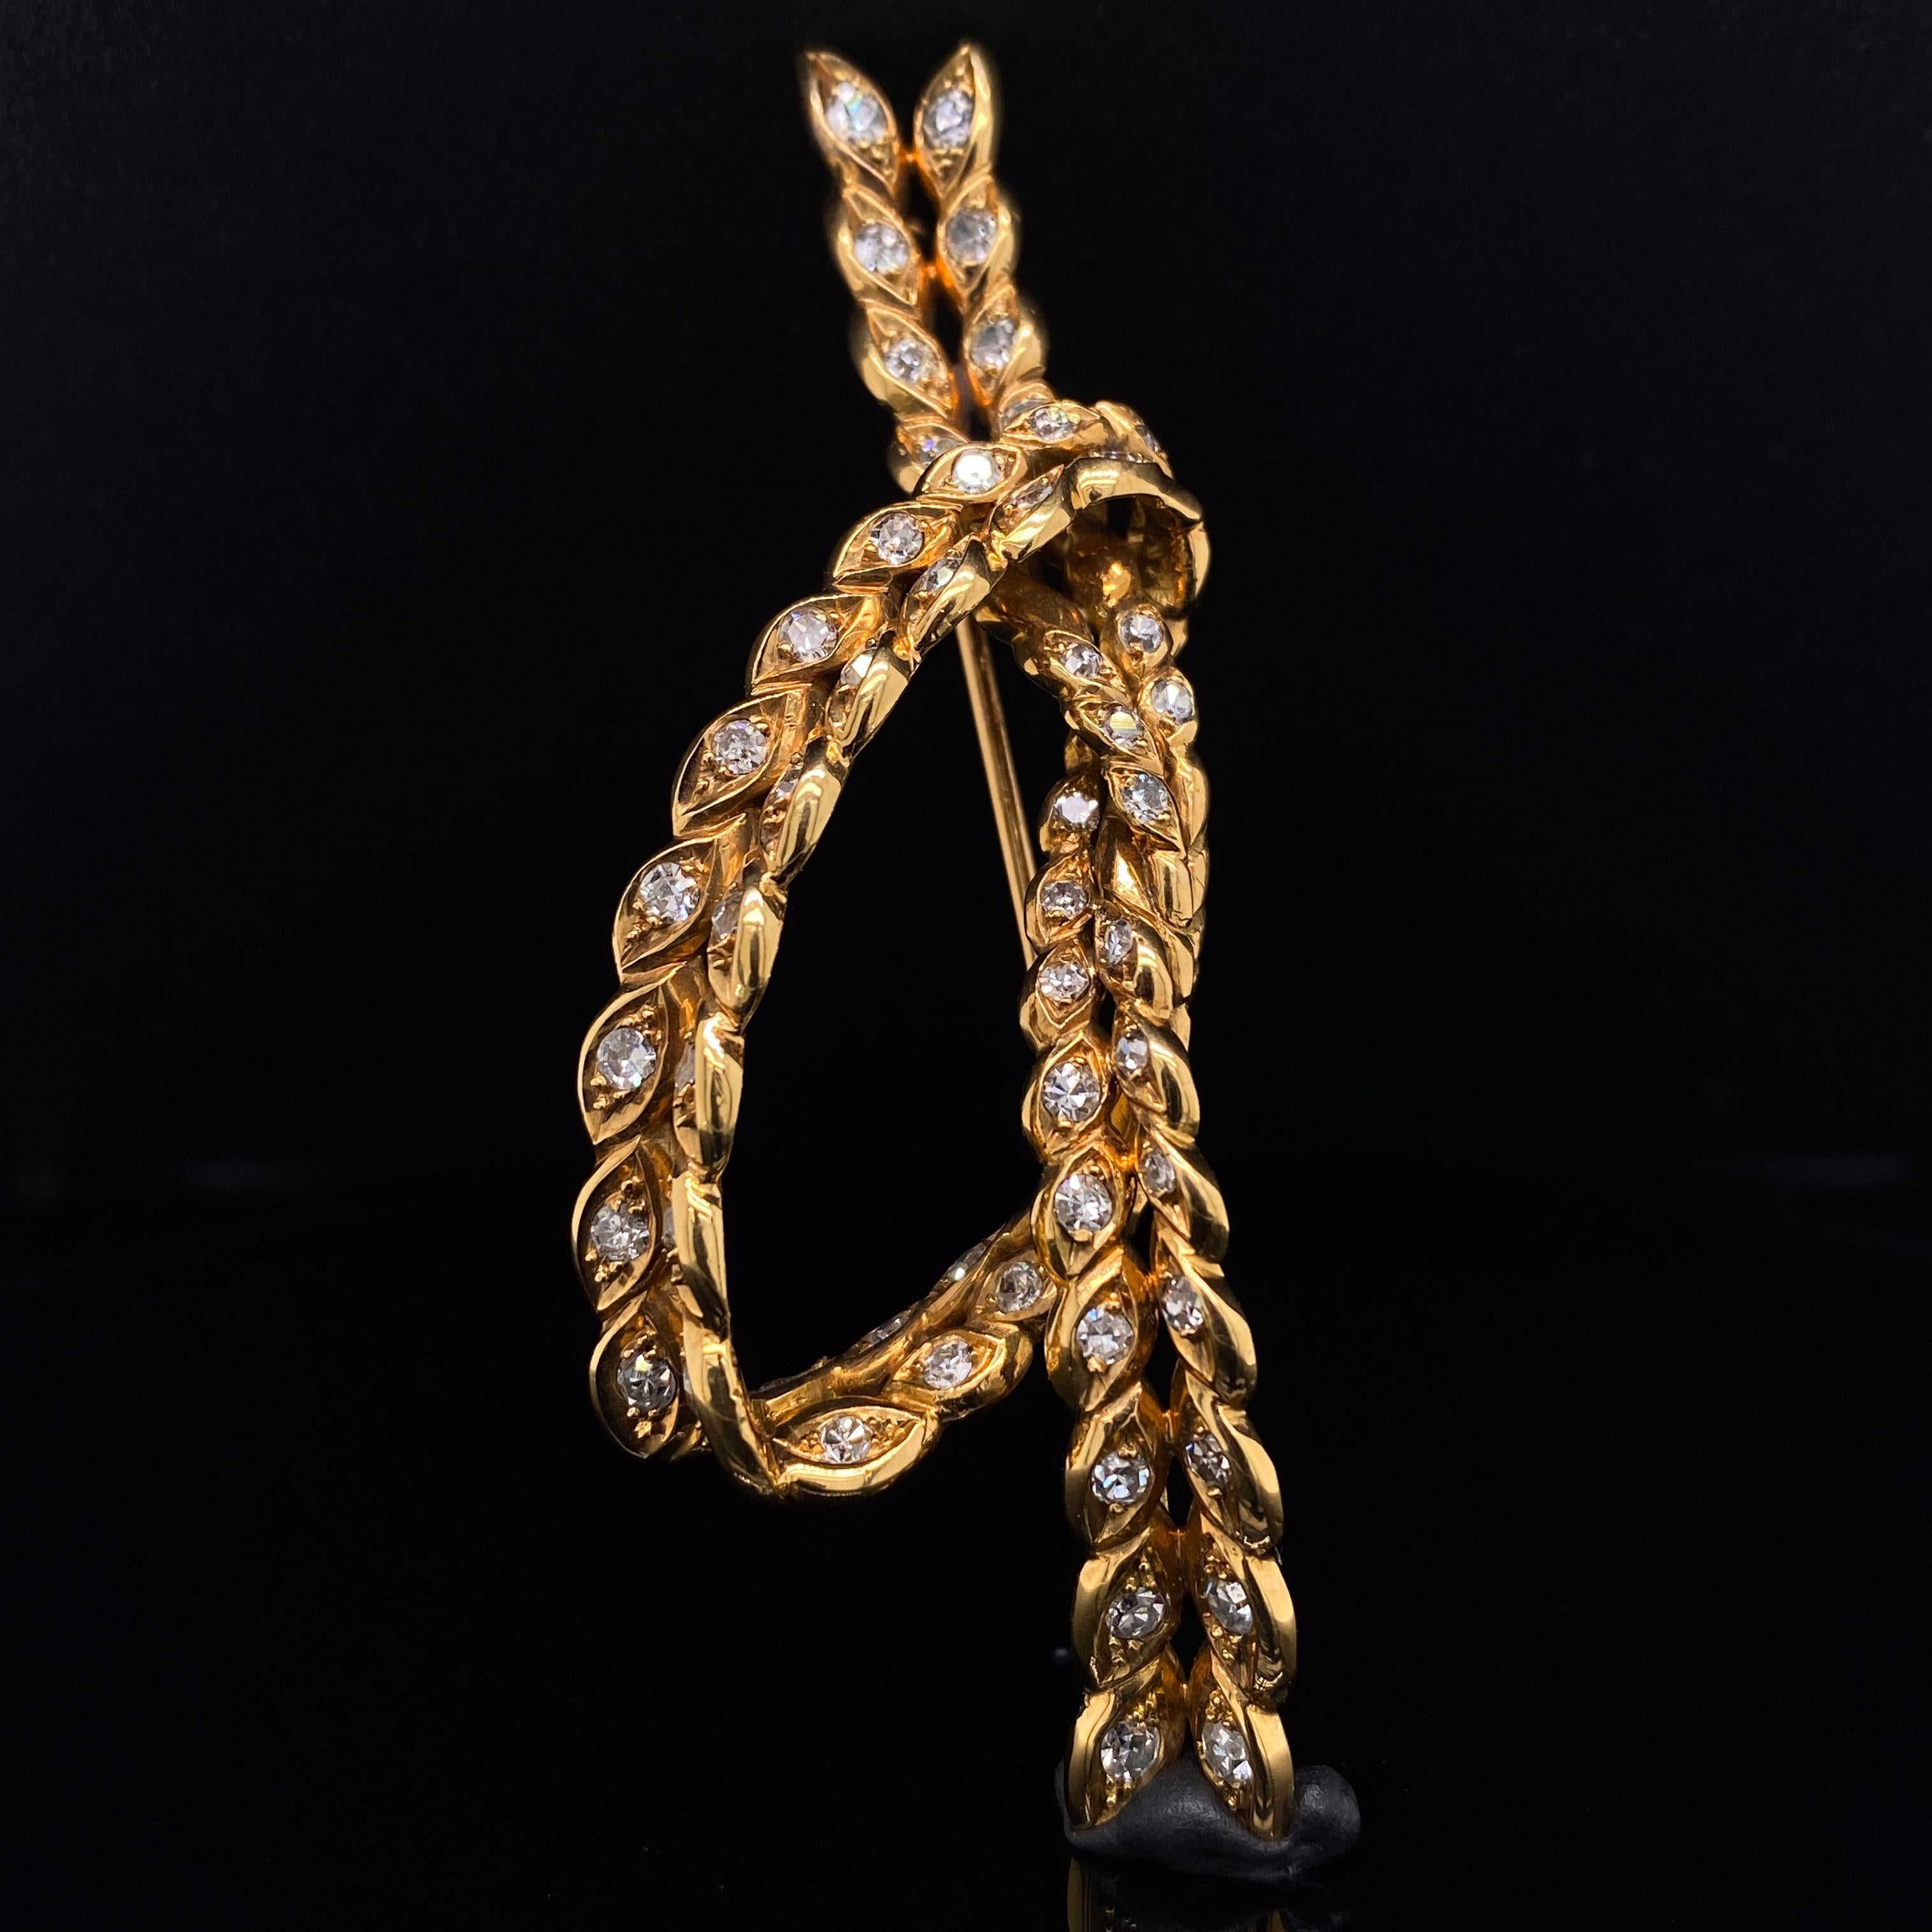 René Boivin diamond set knot design 18 karat yellow gold brooch circa 1950.

A statement diamond set knot design brooch from Boivin, the jewellery house founded in 1890 and most famous for its bold creations of the 1930’s and 40’s. 

This brooch's